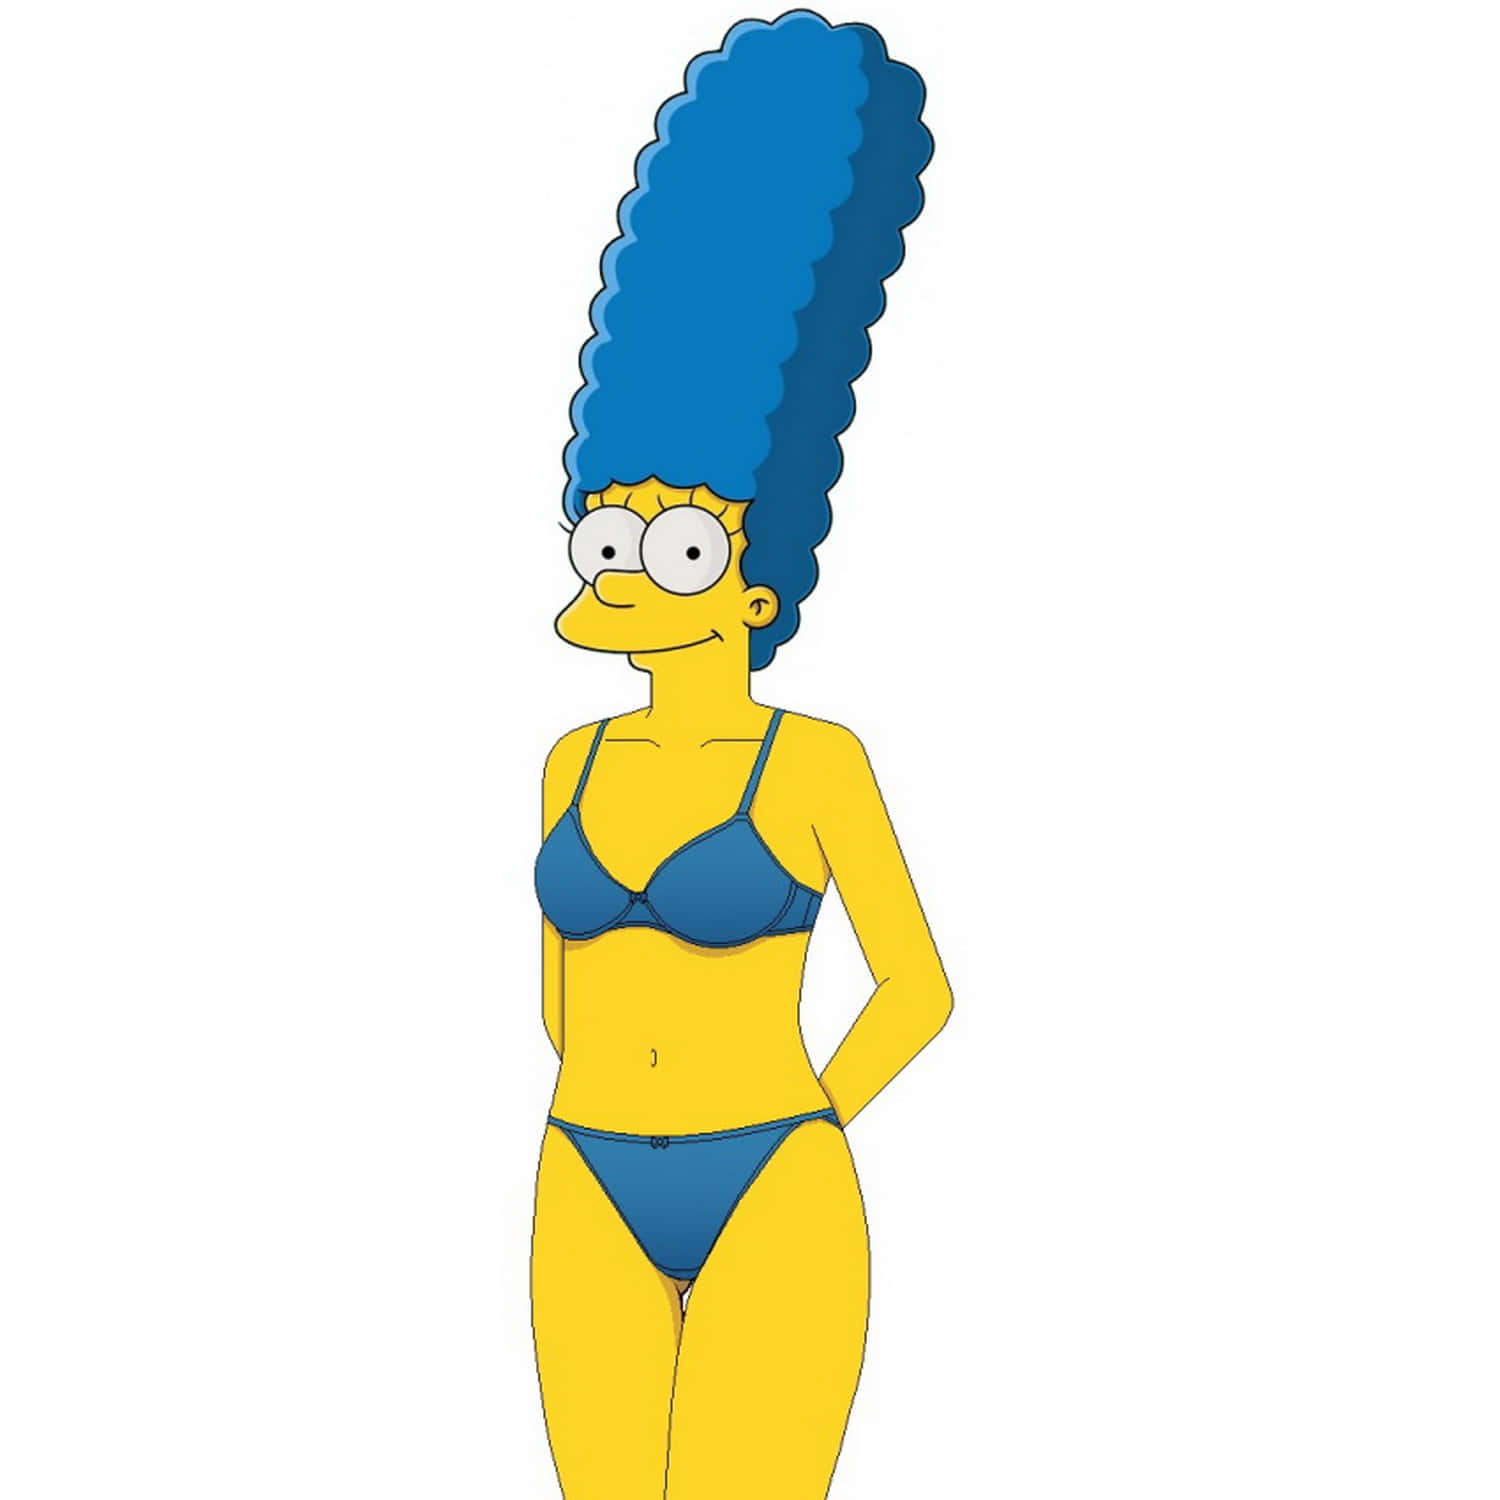 Marge simpson pink suit - 🧡 I Think About This a Lot: Marge Simpson’s Pink...